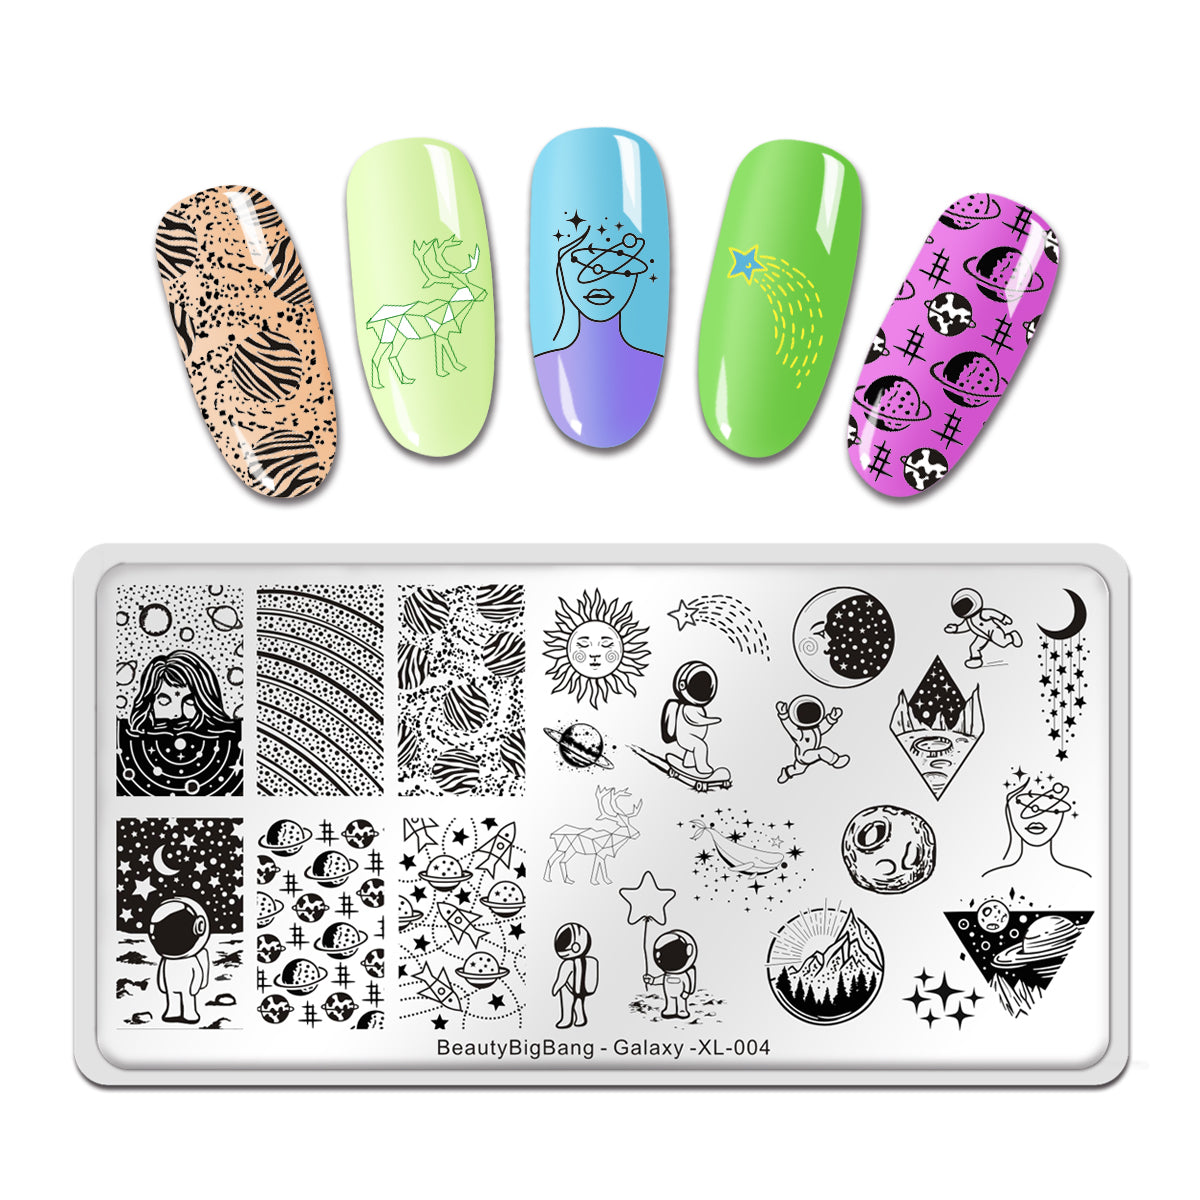 Starry Star Moon Design Stamping Plates Nail Art Kit 2pcs Galaxy Night Sky  Large Stamp Templates Space Planet Stamper Plate Heart Sun Geometry